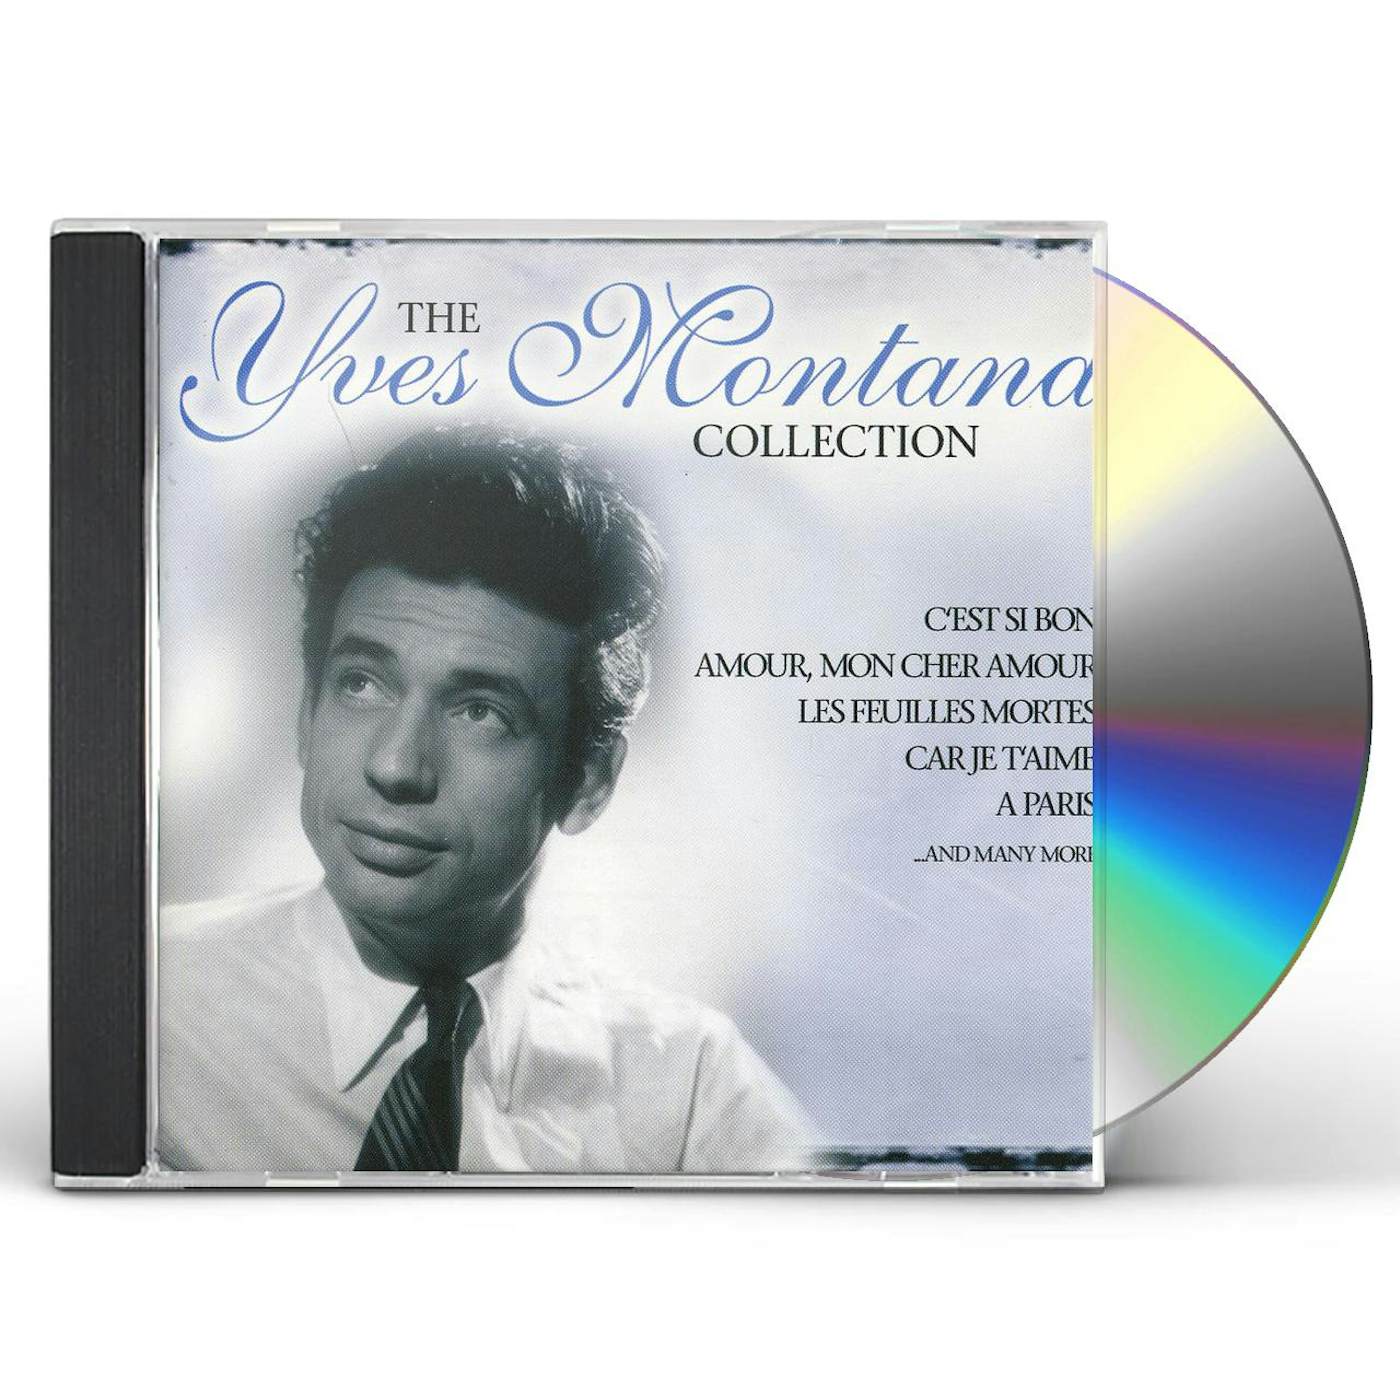 YVES MONTAND COLLECTION CD